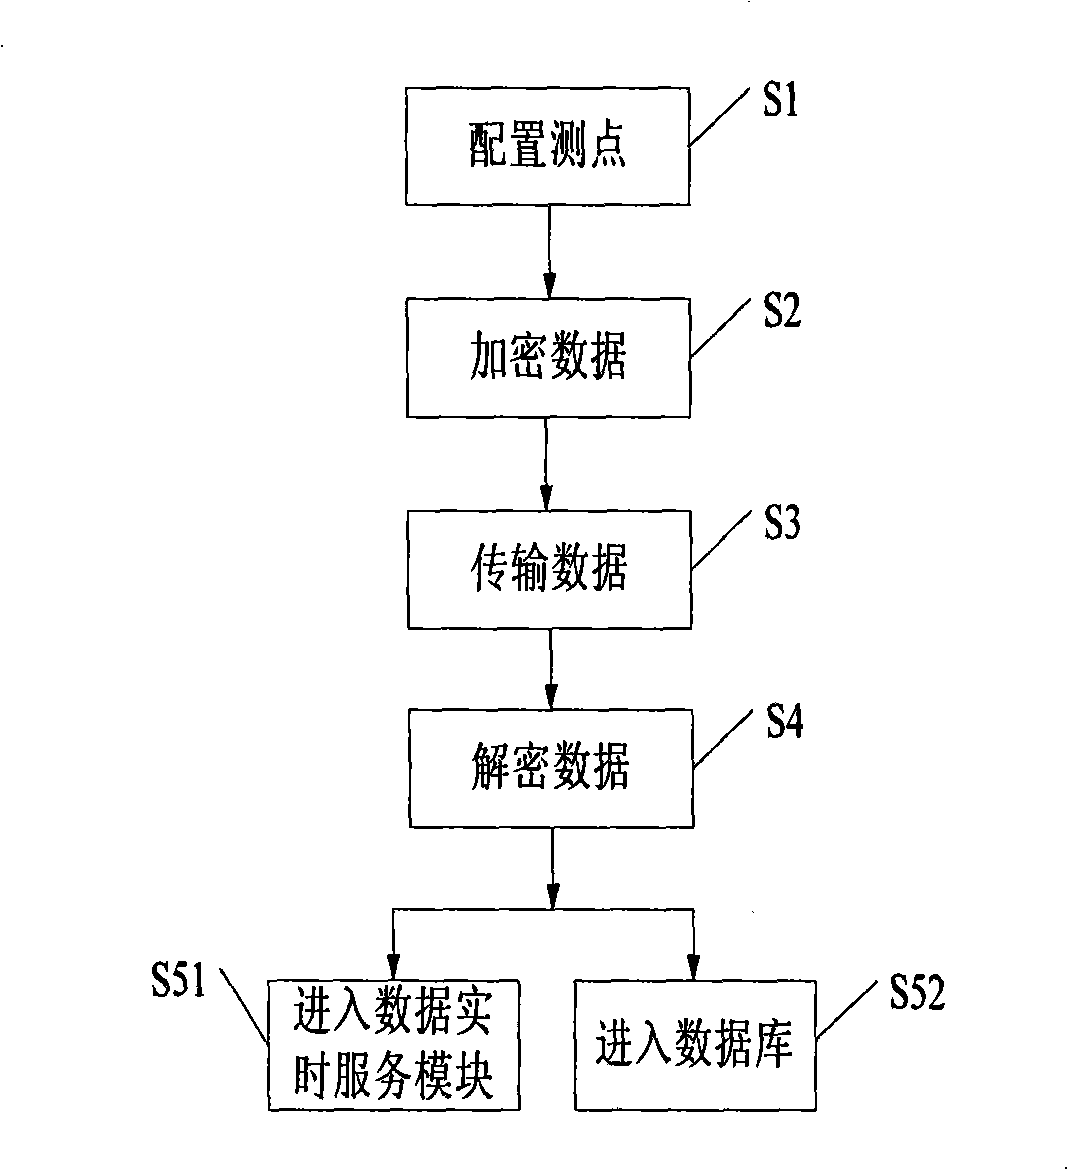 Remote monitoring and anglicizing system and method of nuclear power steam turbine regulation system